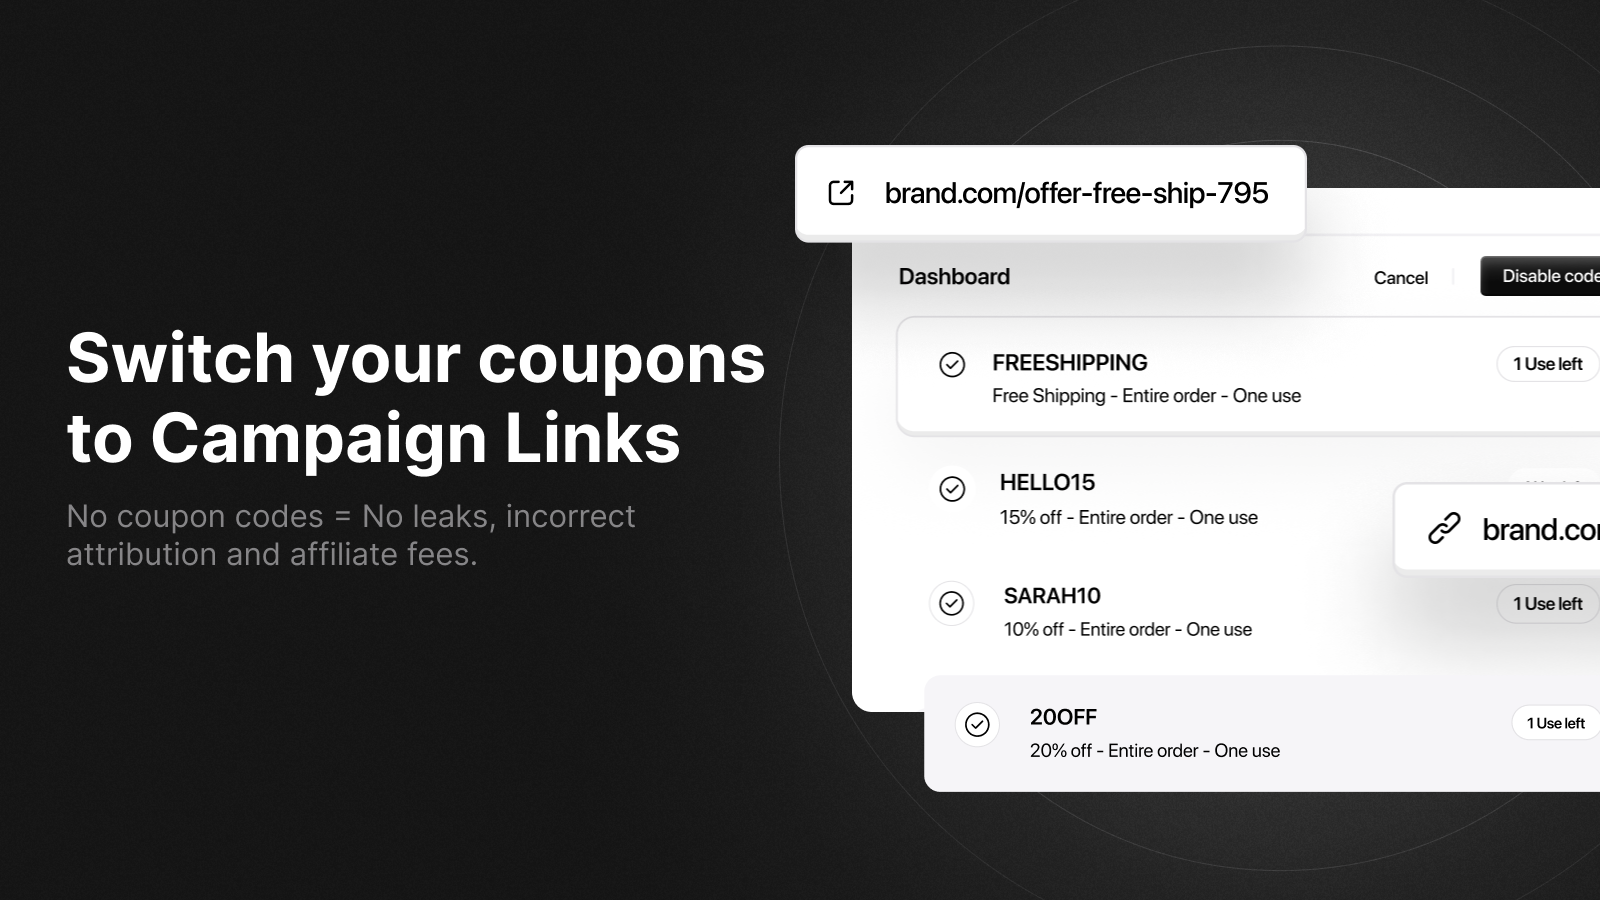 Switch your coupons to Campaign Links